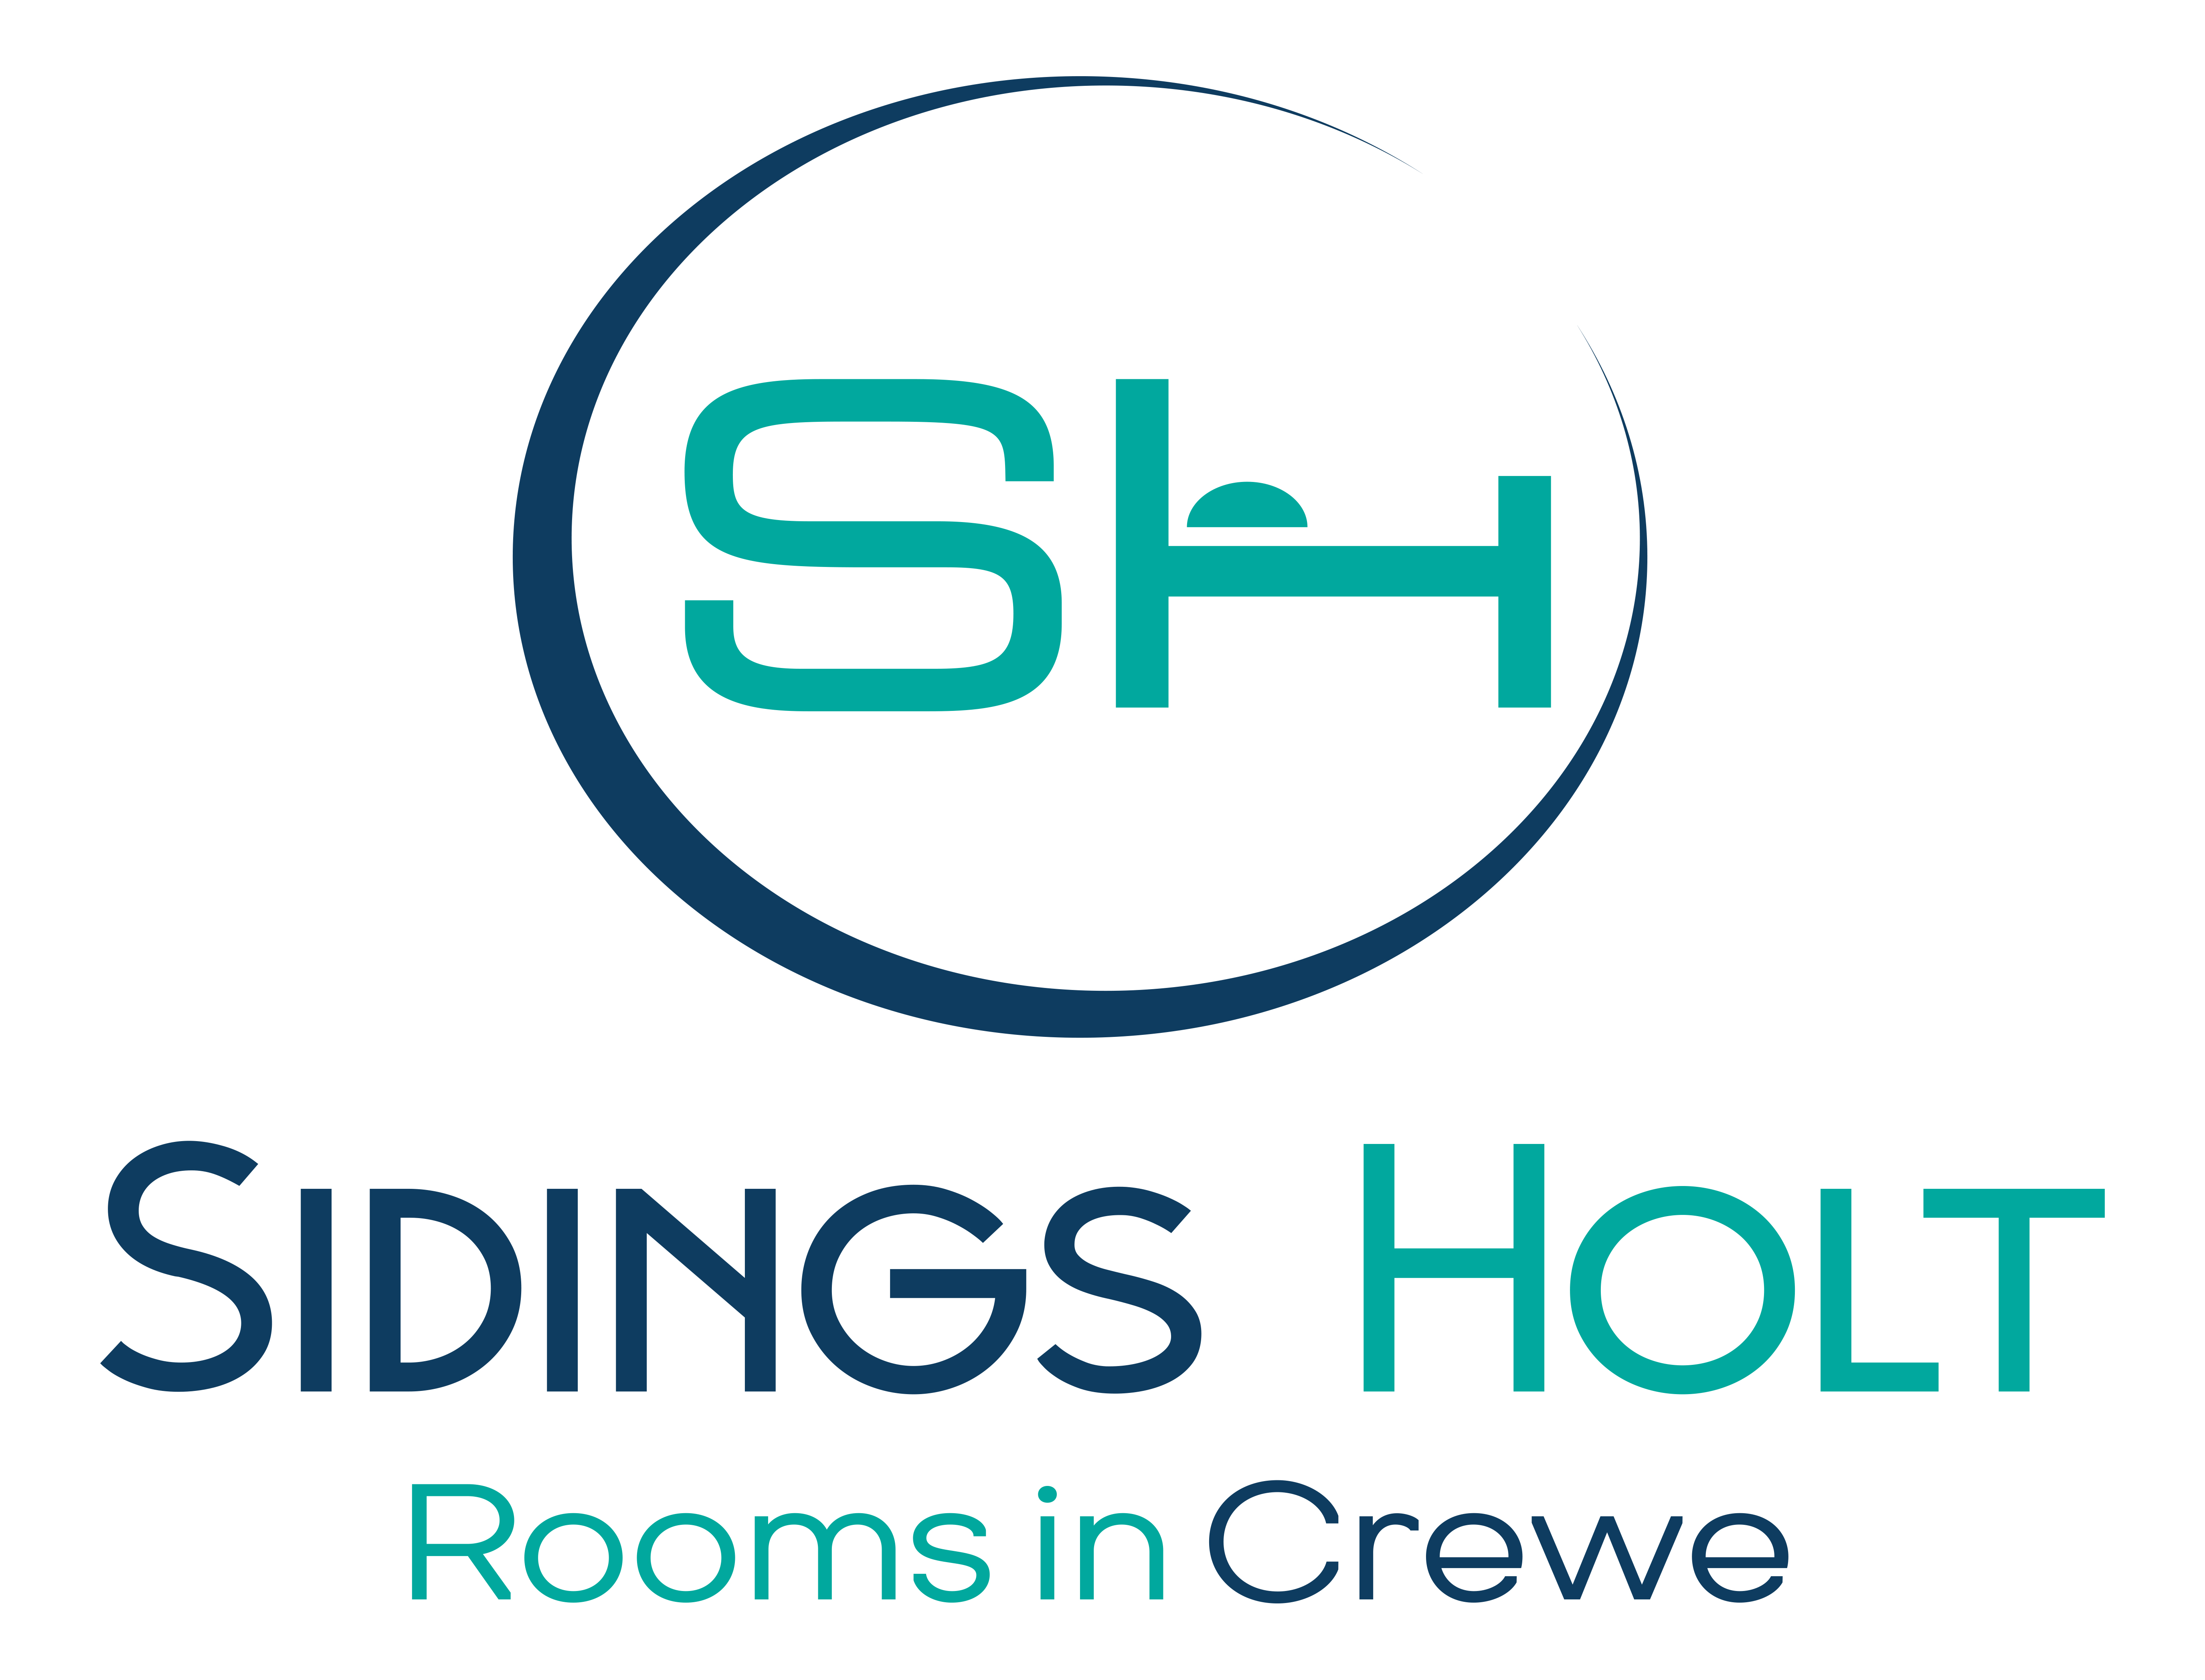 Sidings Holt logo Rooms in crewe